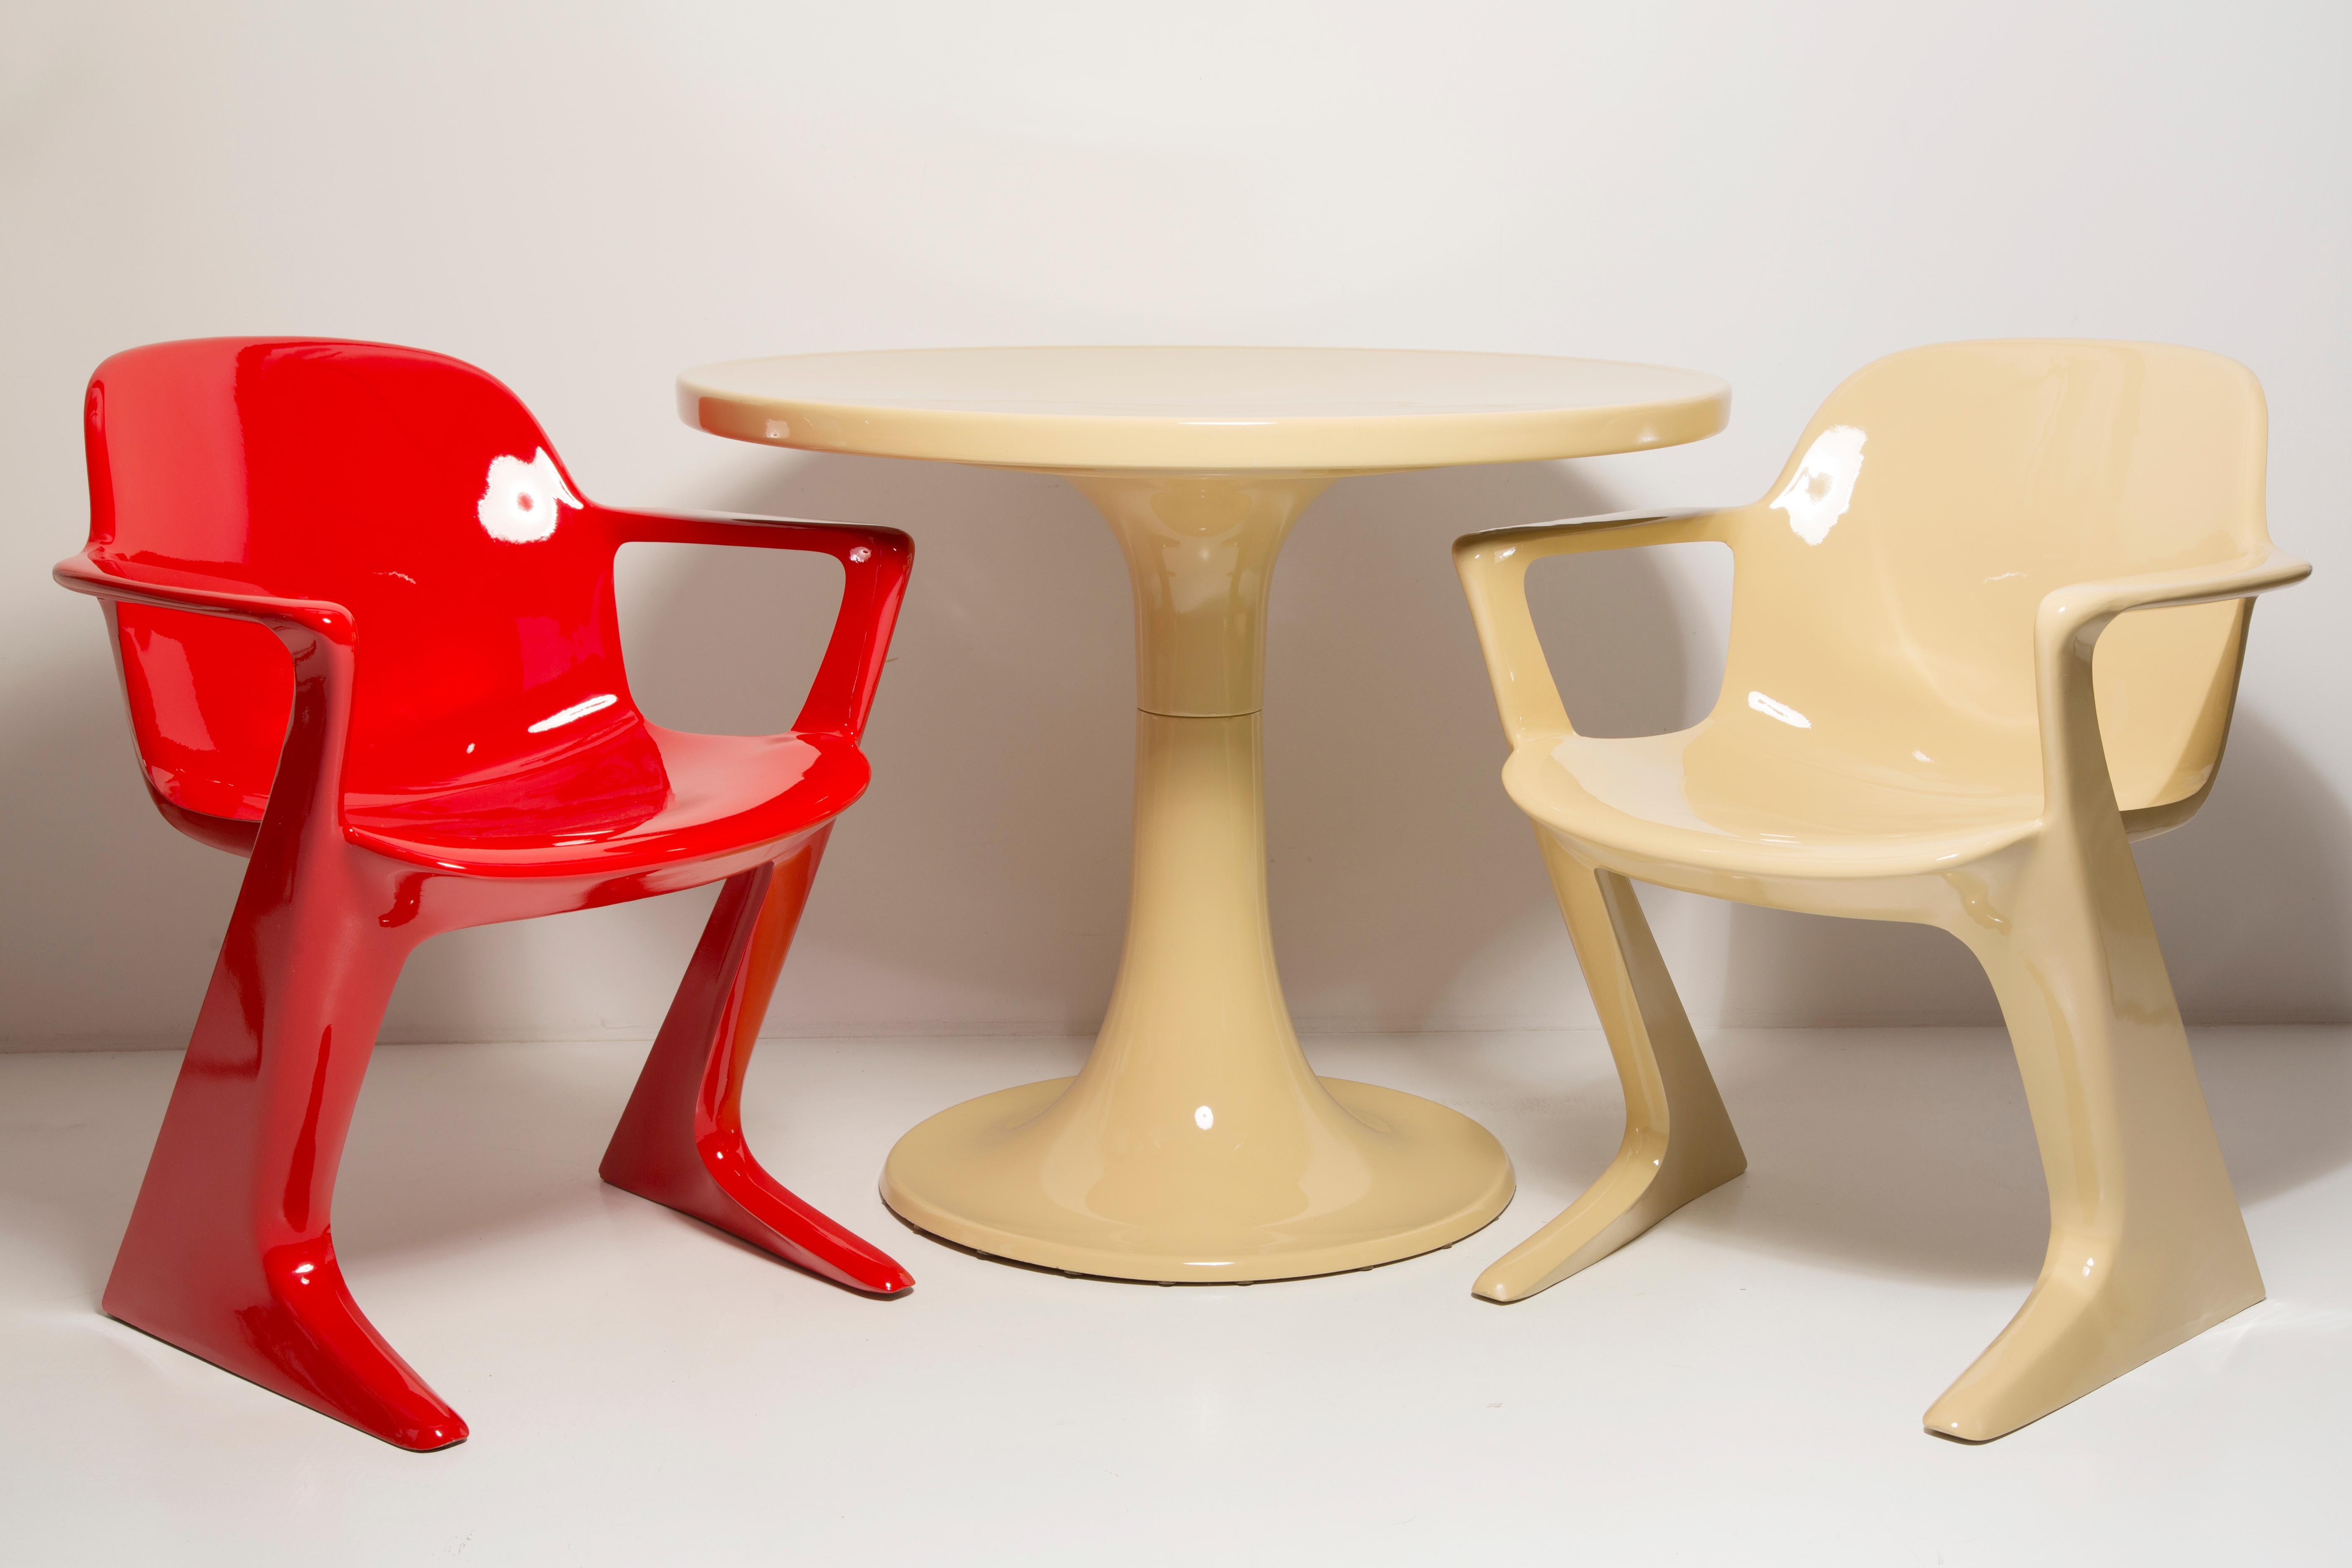 Midcentury Beige and Red Kangaroo Chairs and Table Ernst Moeckl, Germany, 1968 For Sale 3